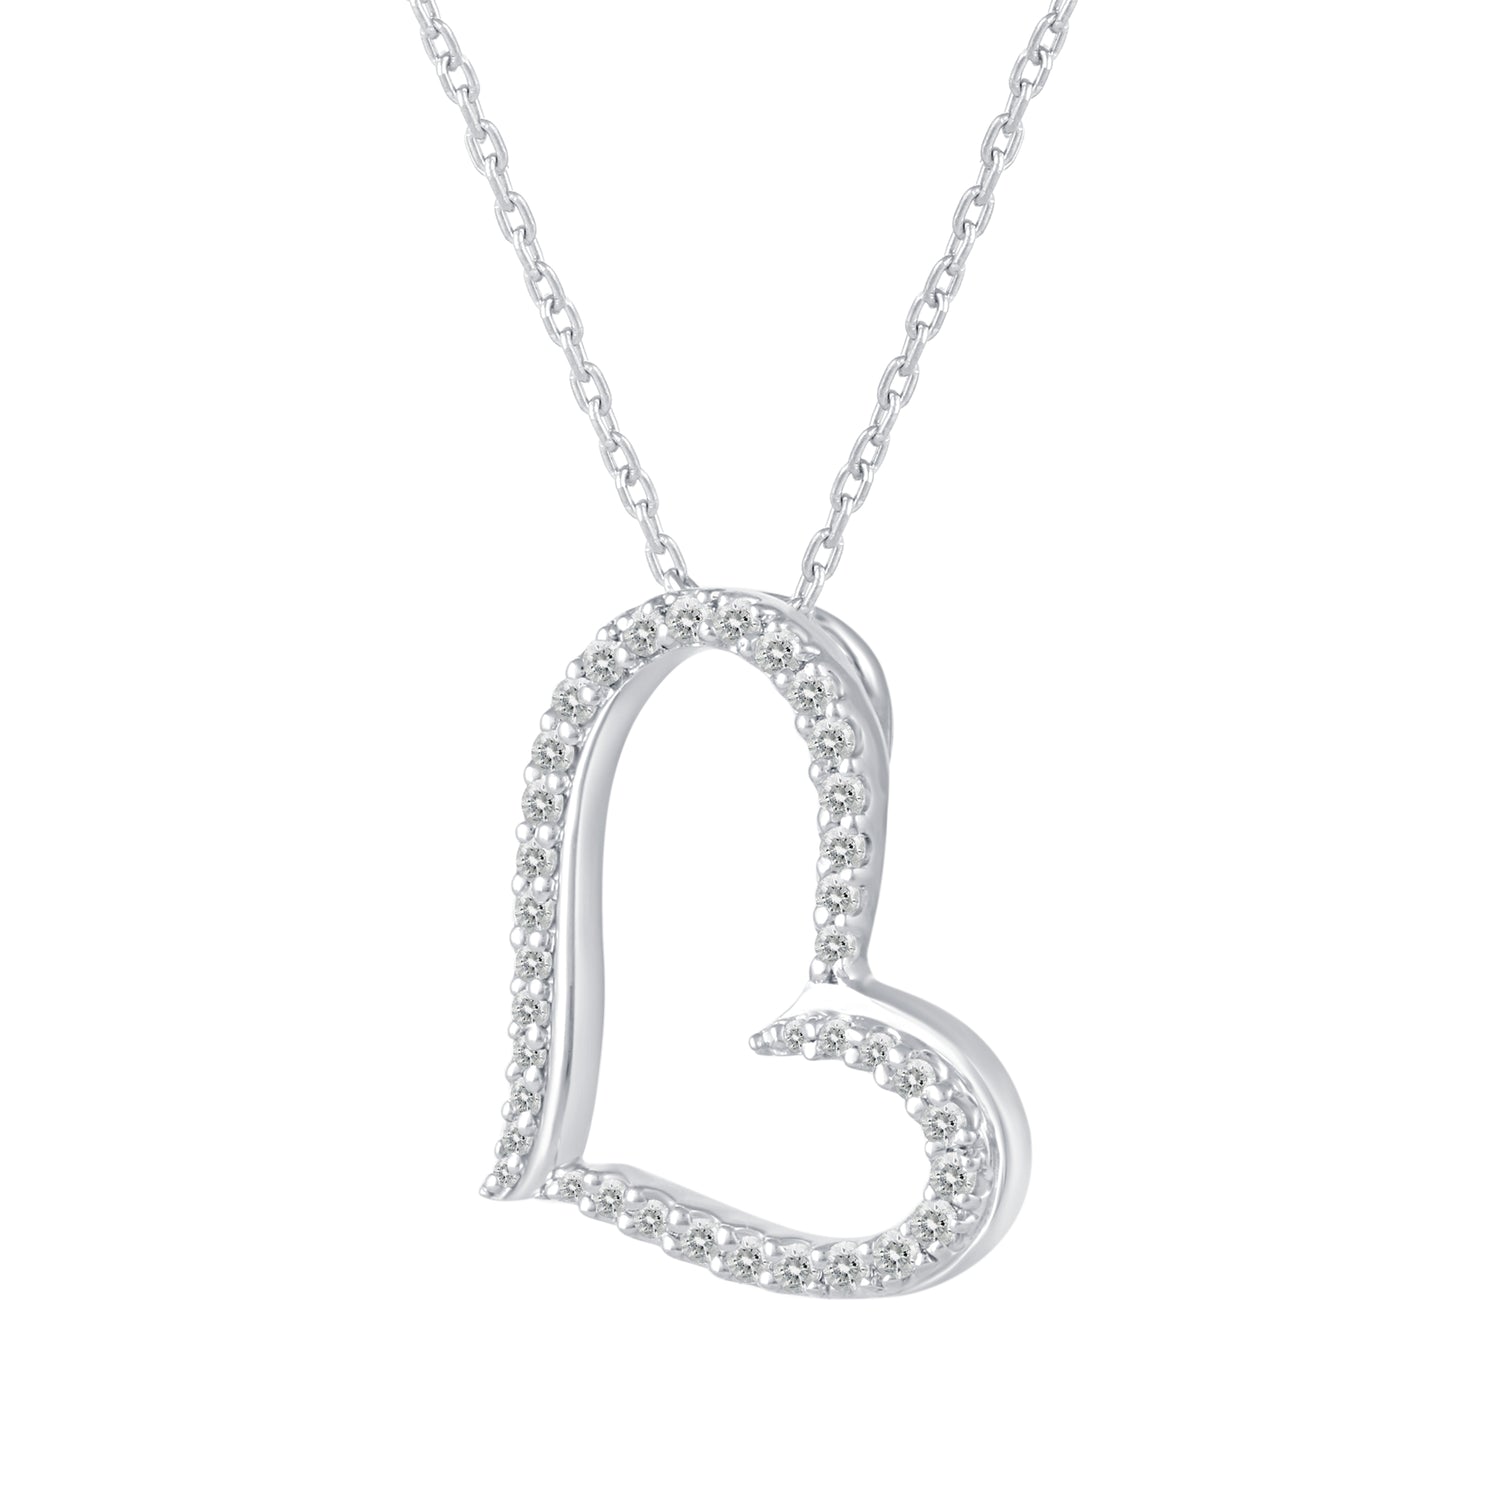 1/2Cttw - 1/4 Cttw Diamond Open Heart Pendant Necklace set in 925 Sterling Silver (Select Heart Design)